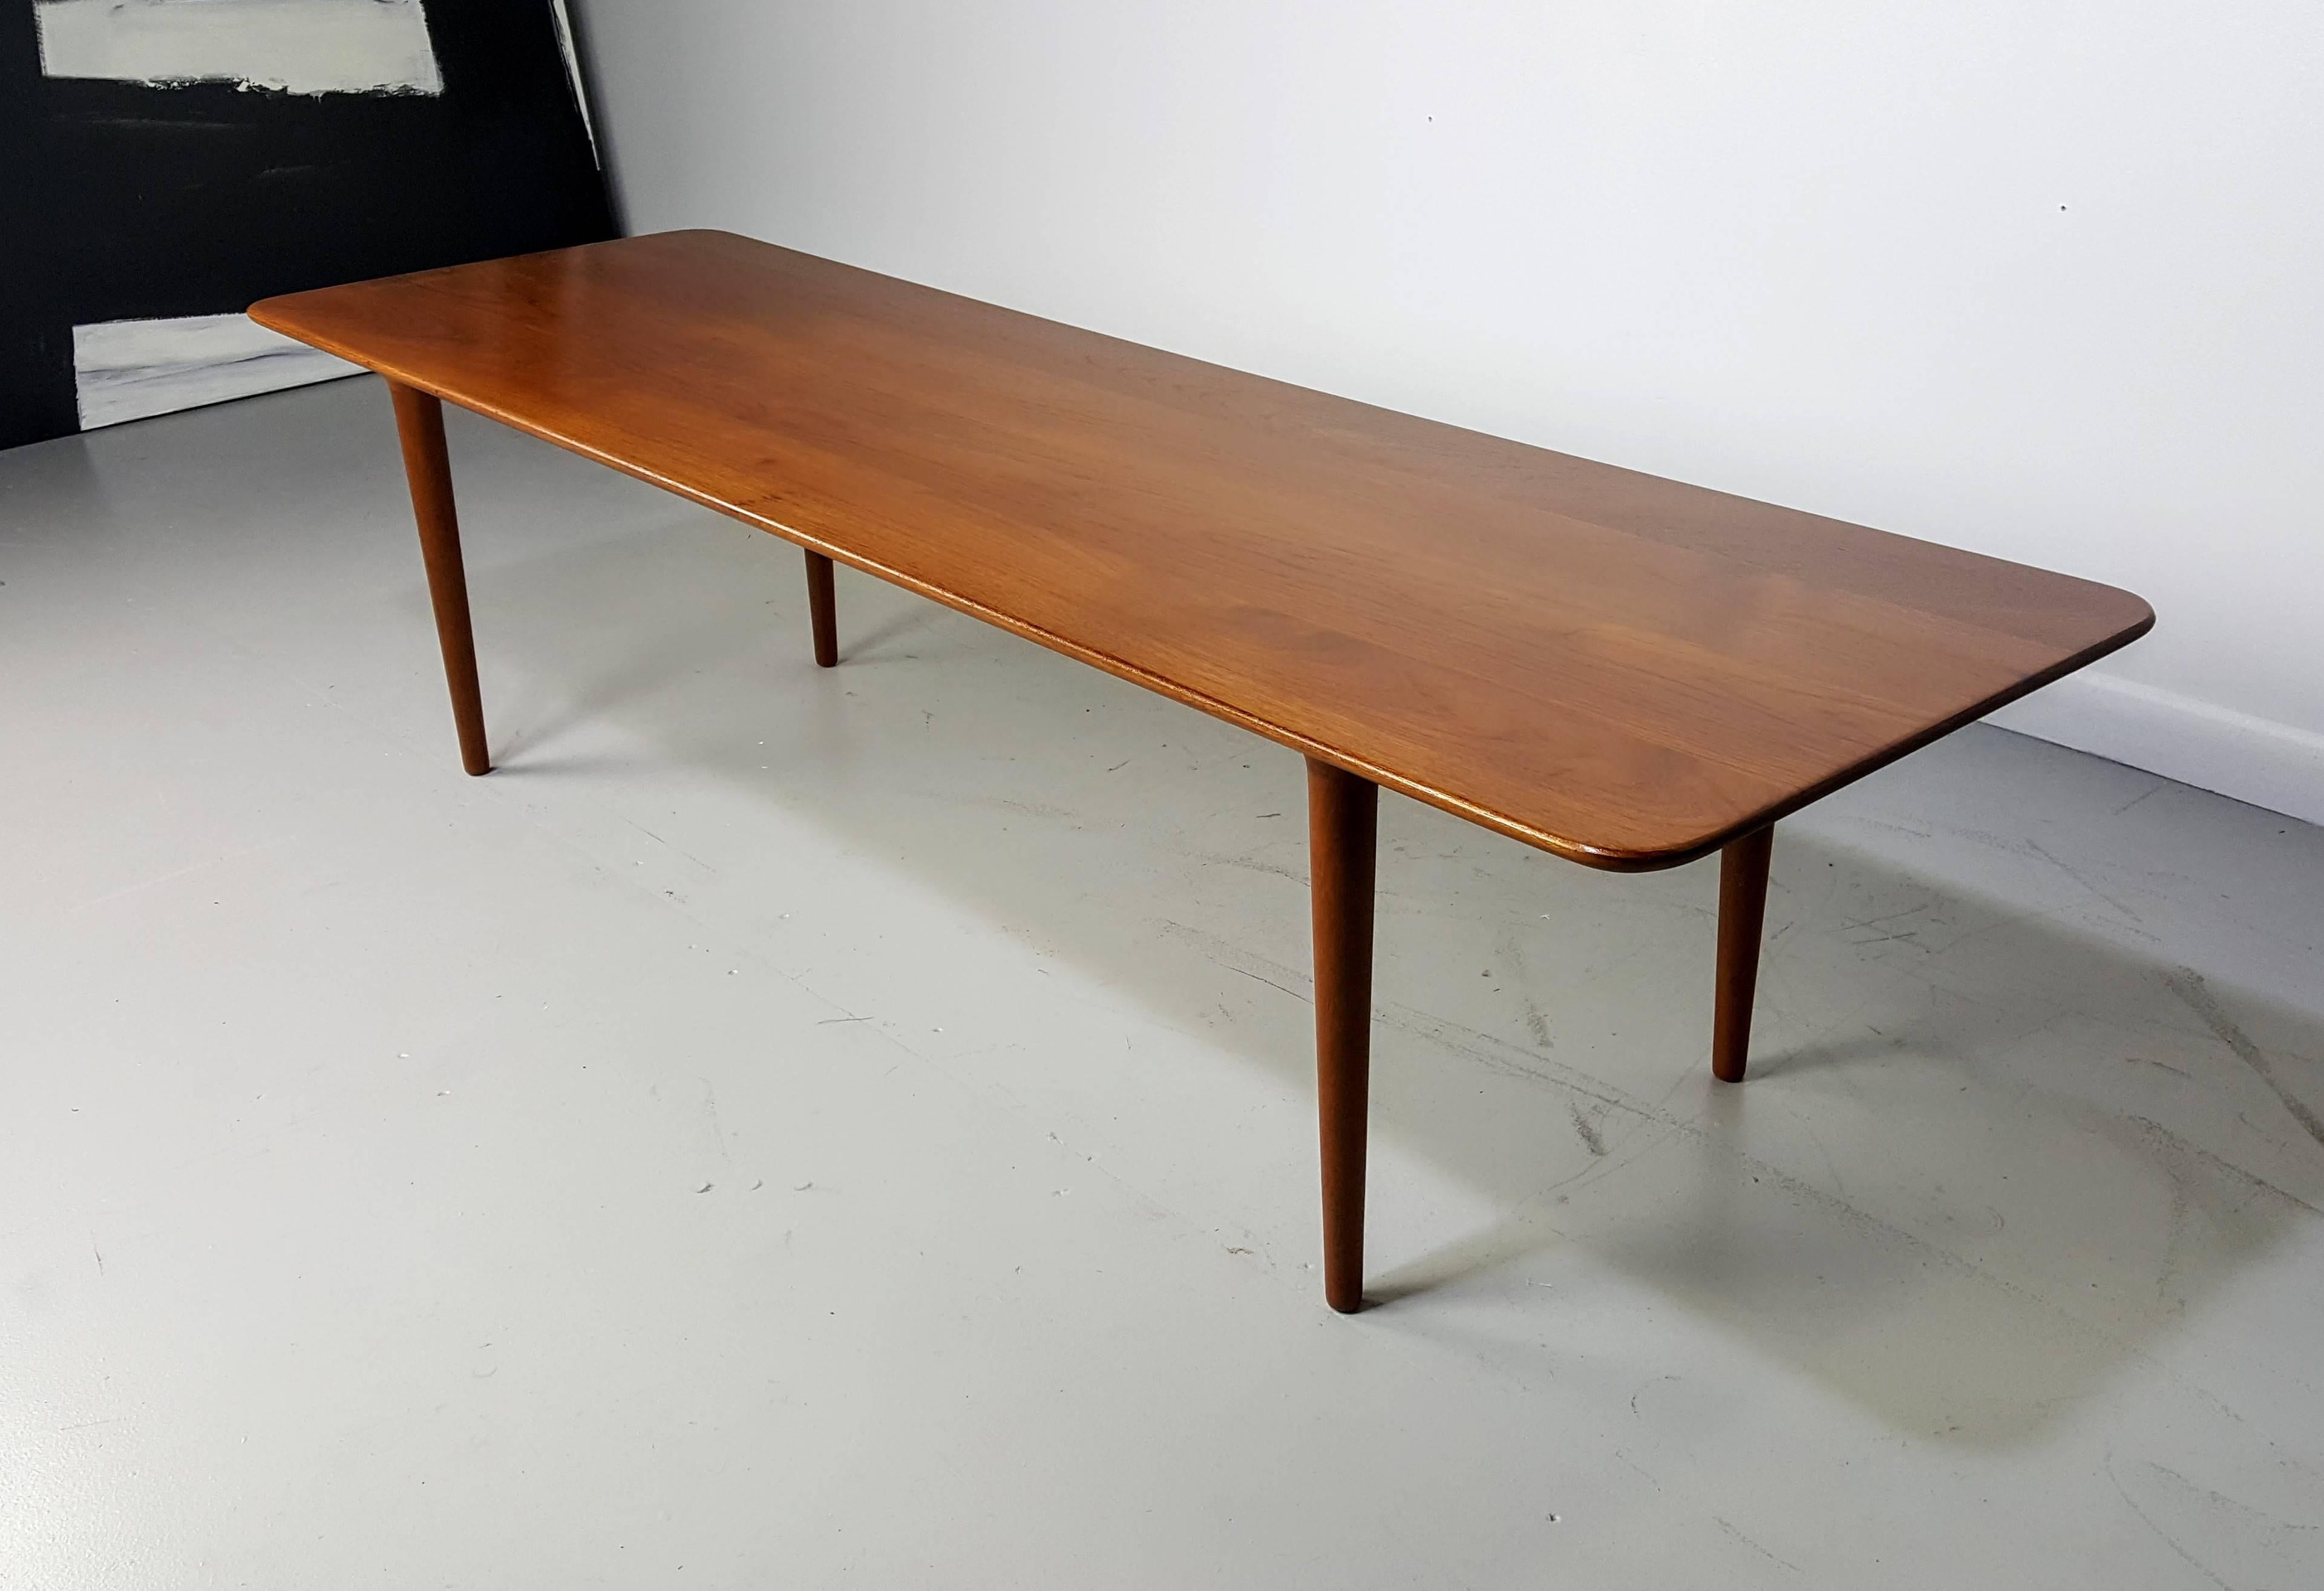 Long simple Danish modern teak coffee table, 1960s. Wonderful detail. Fully restored. Excellent condition.